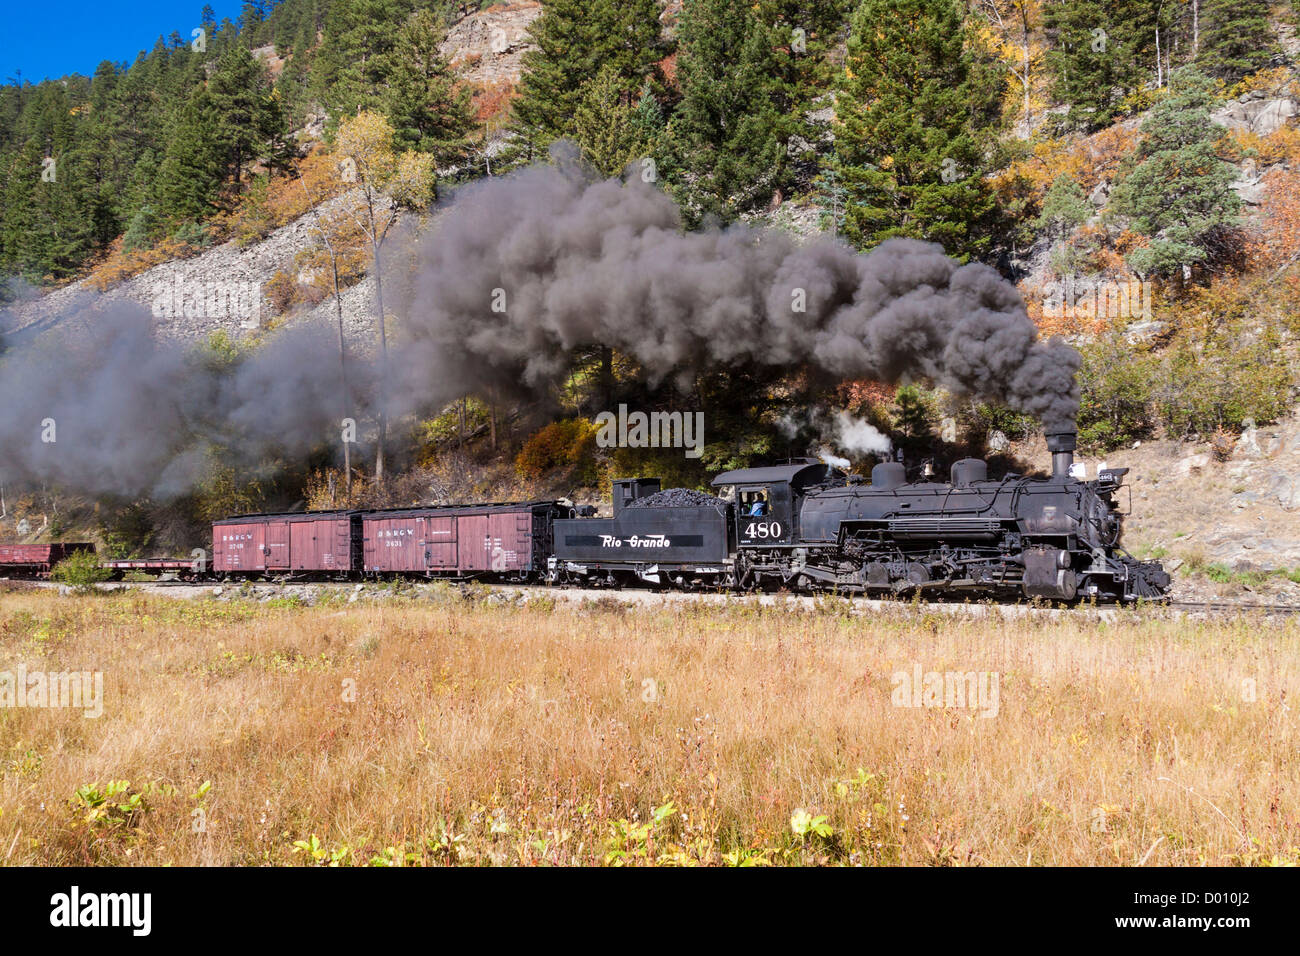 1925 2-8-2 Mikado type Baldwin Steam Locomotive pulling historic mixed consist train at Needle Creek meadow on D&SNG Railroad Stock Photo